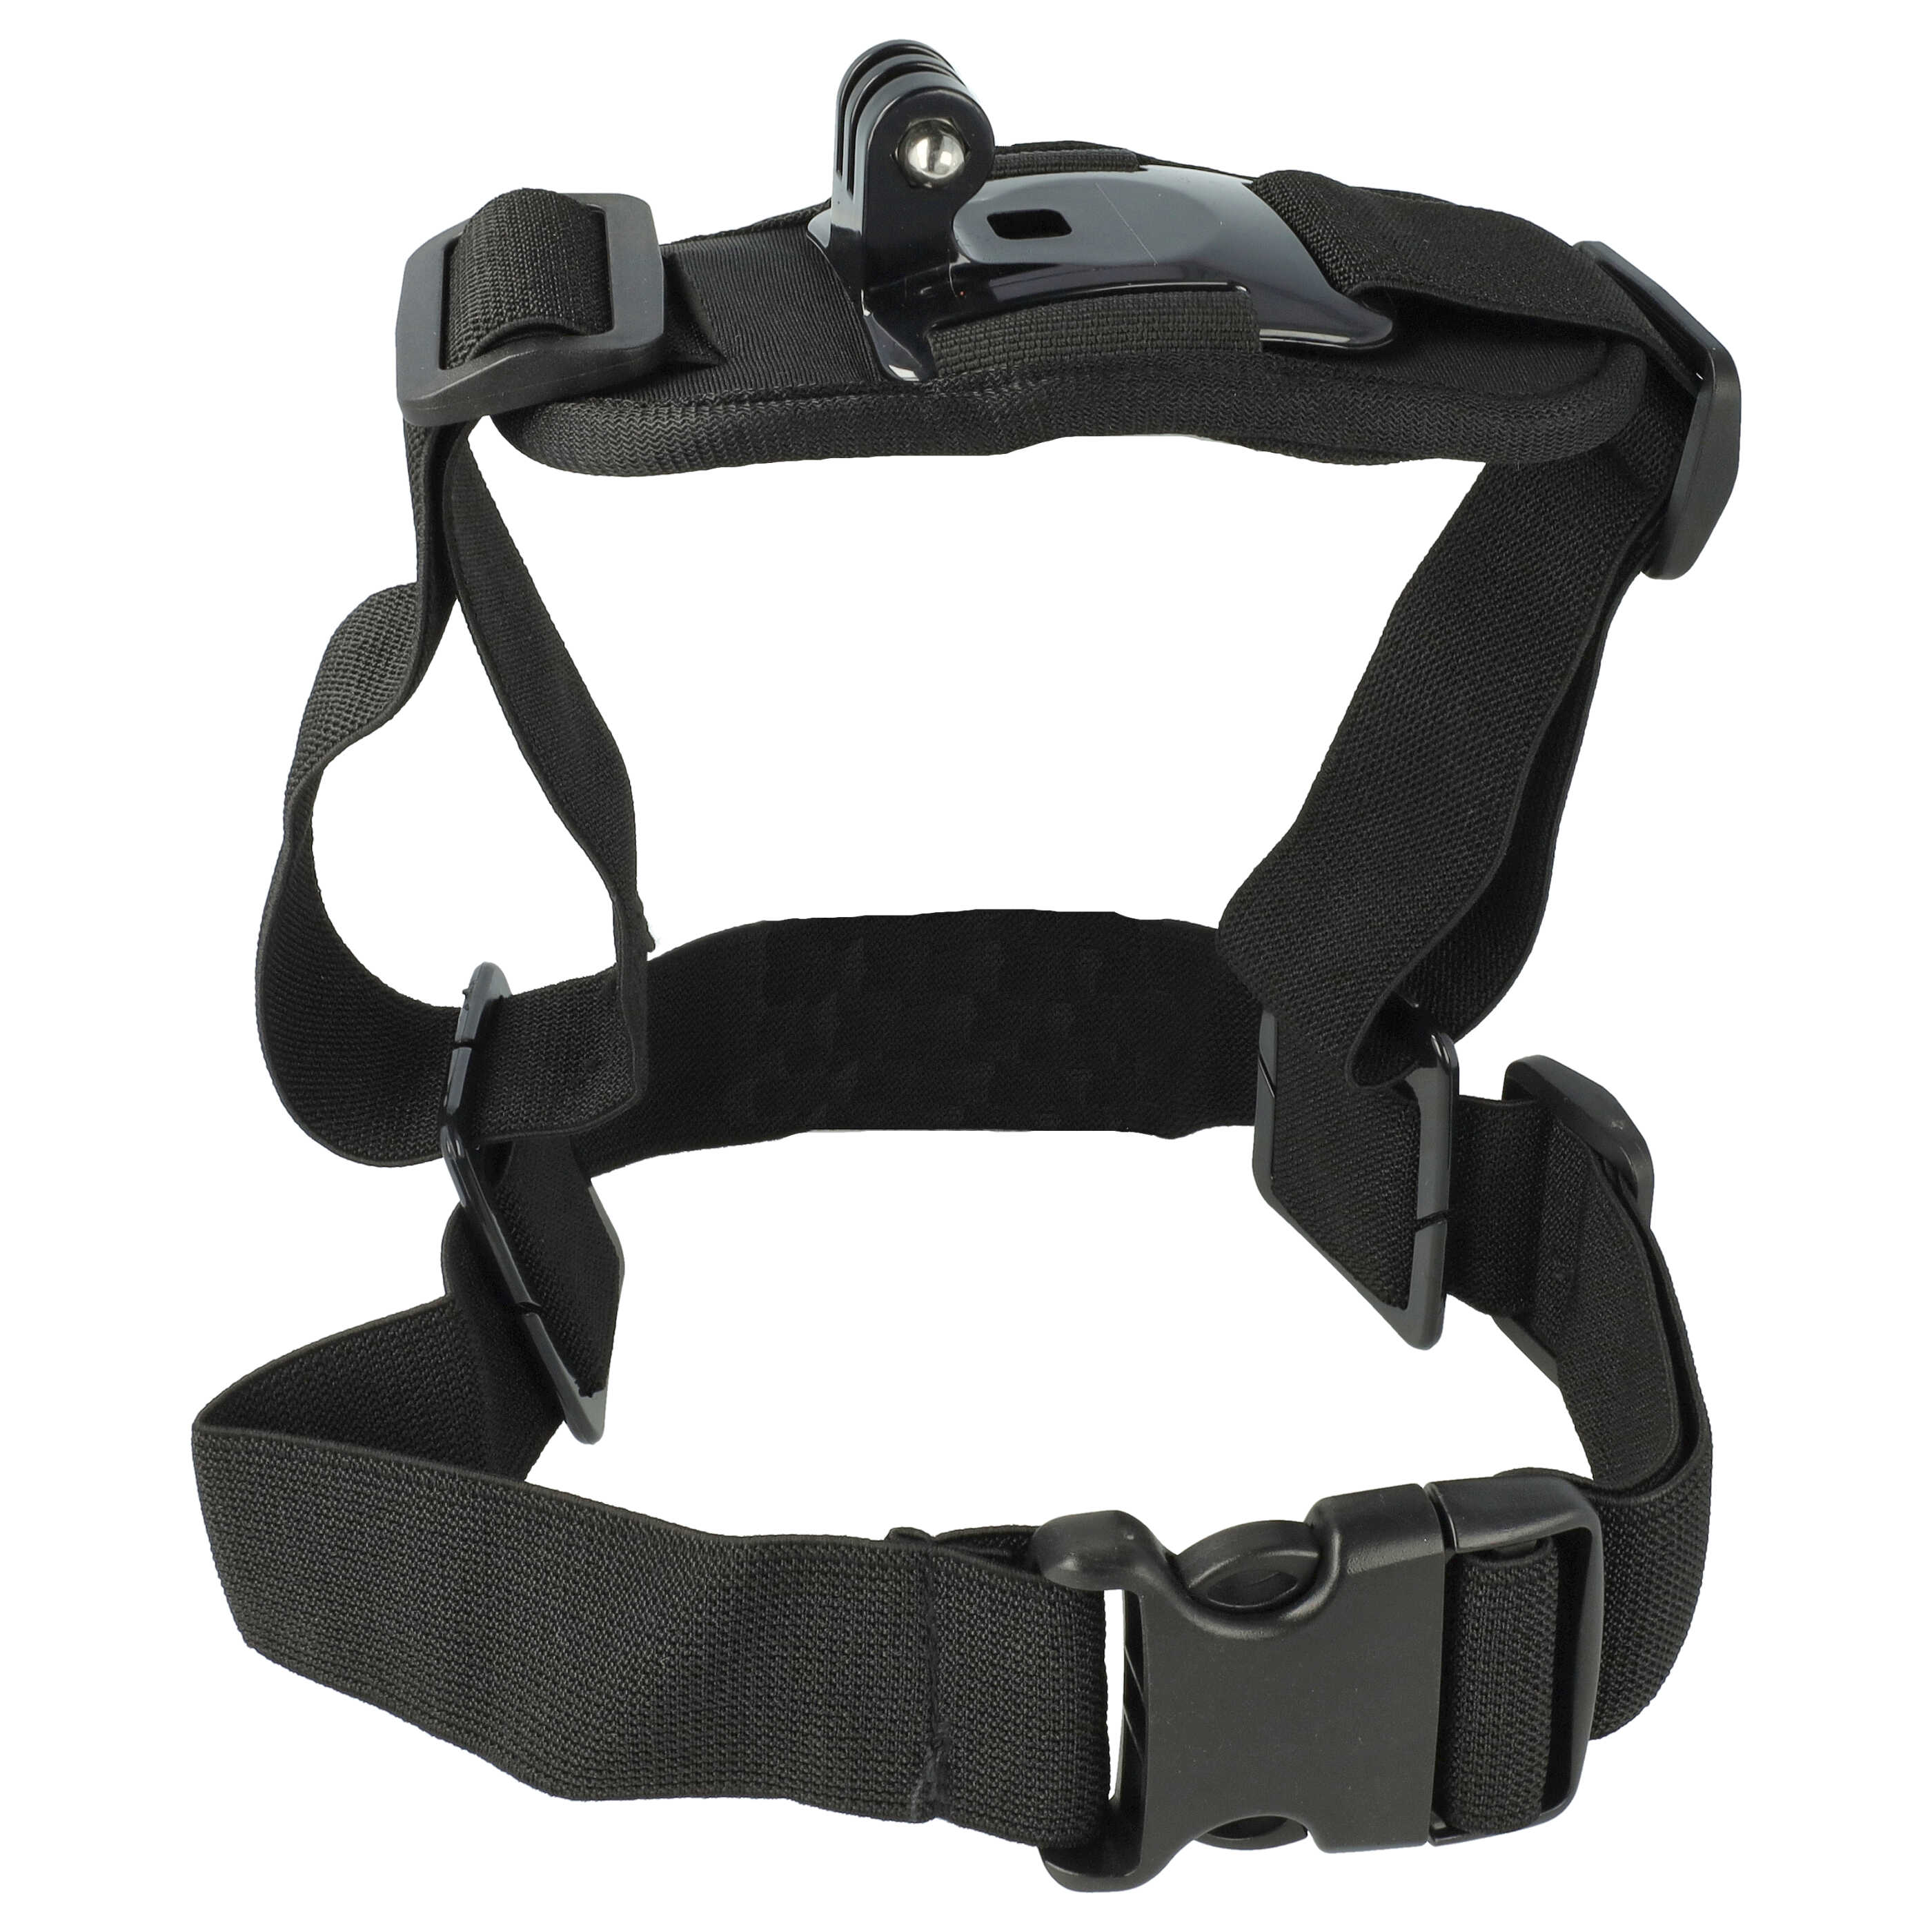 3 Way Chest Strap suitable for Action Camera etc. - Adjustable, Mount, Quick Release Clip